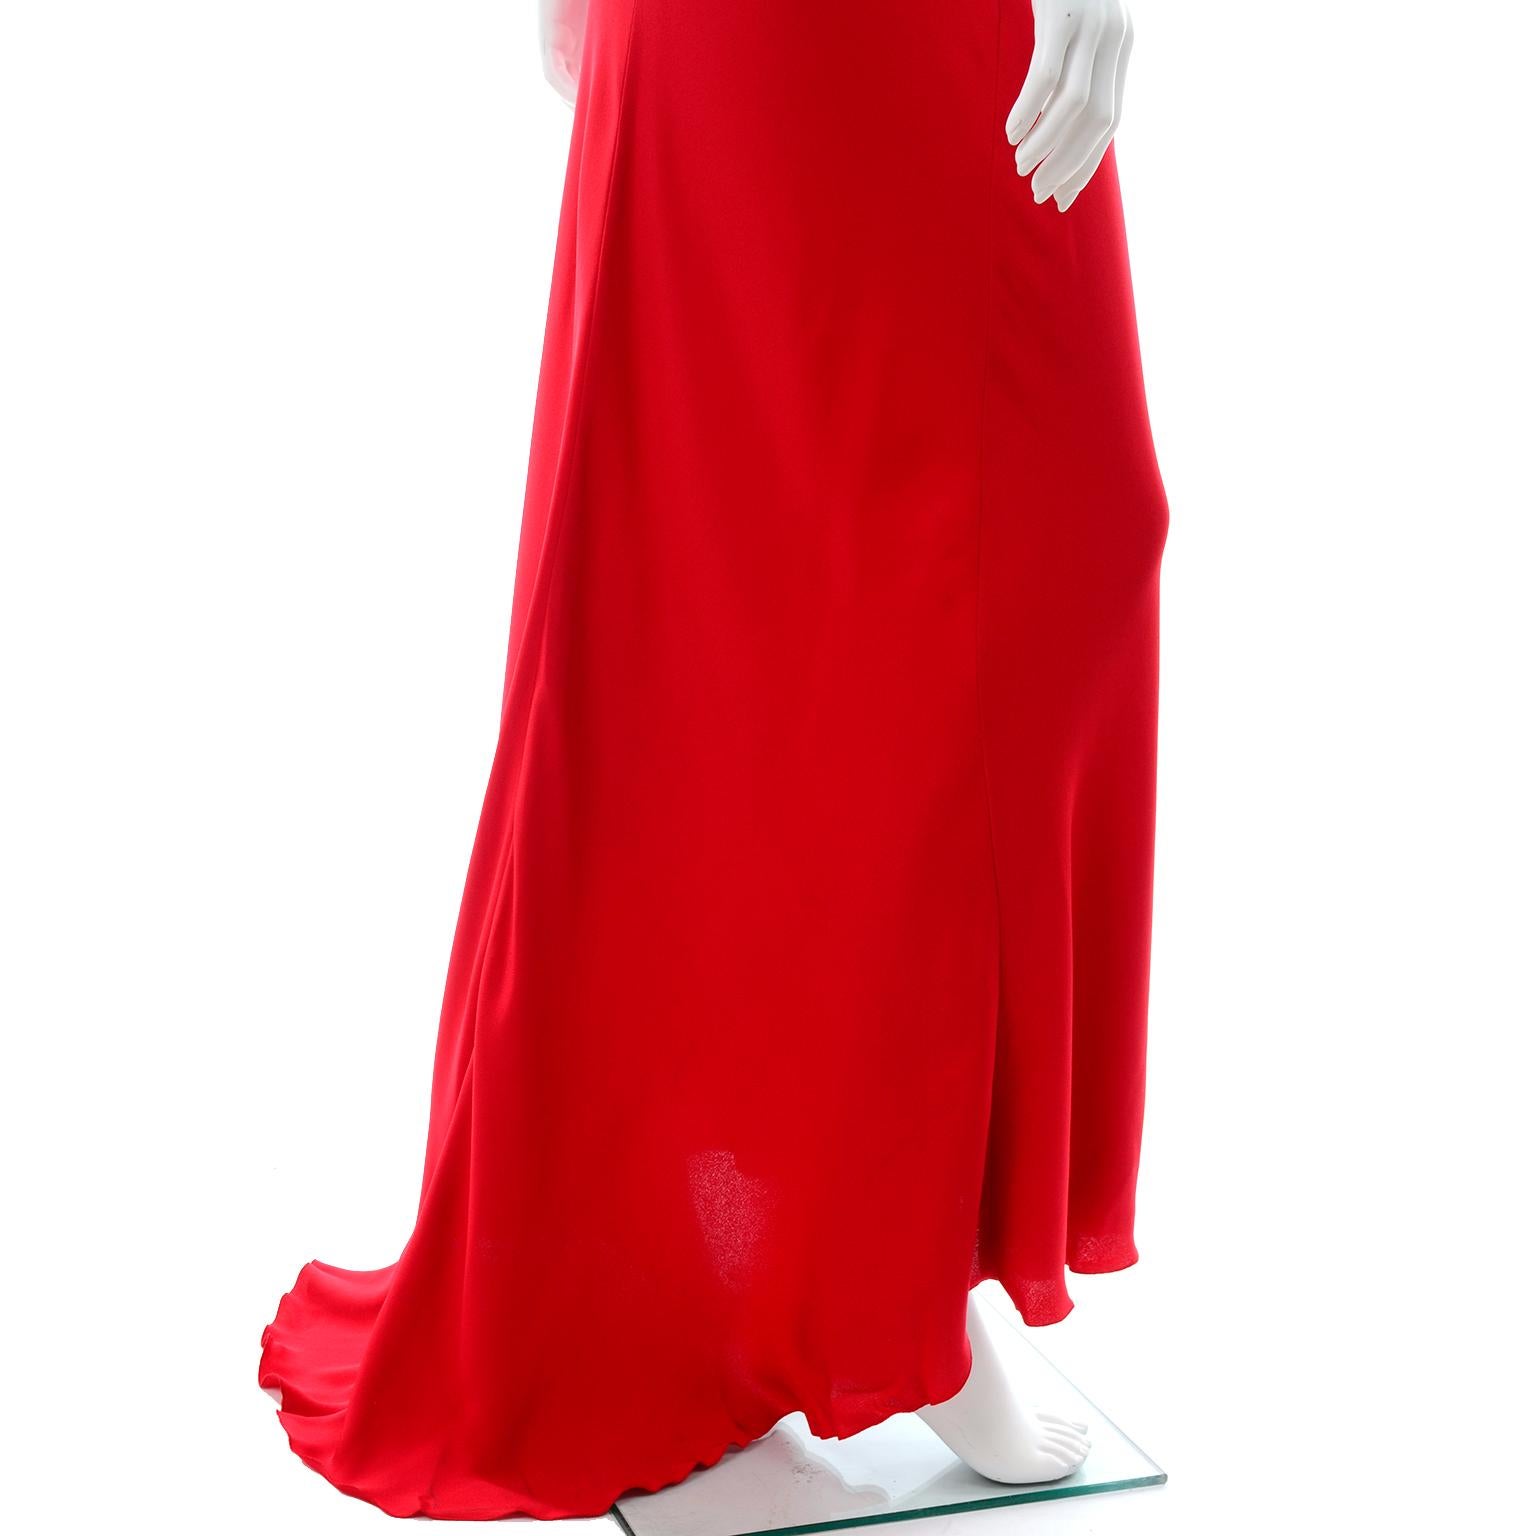 Vintage Valentino Boutique Silk Red Evening Bias Cut Long Slip Dress With Train 2